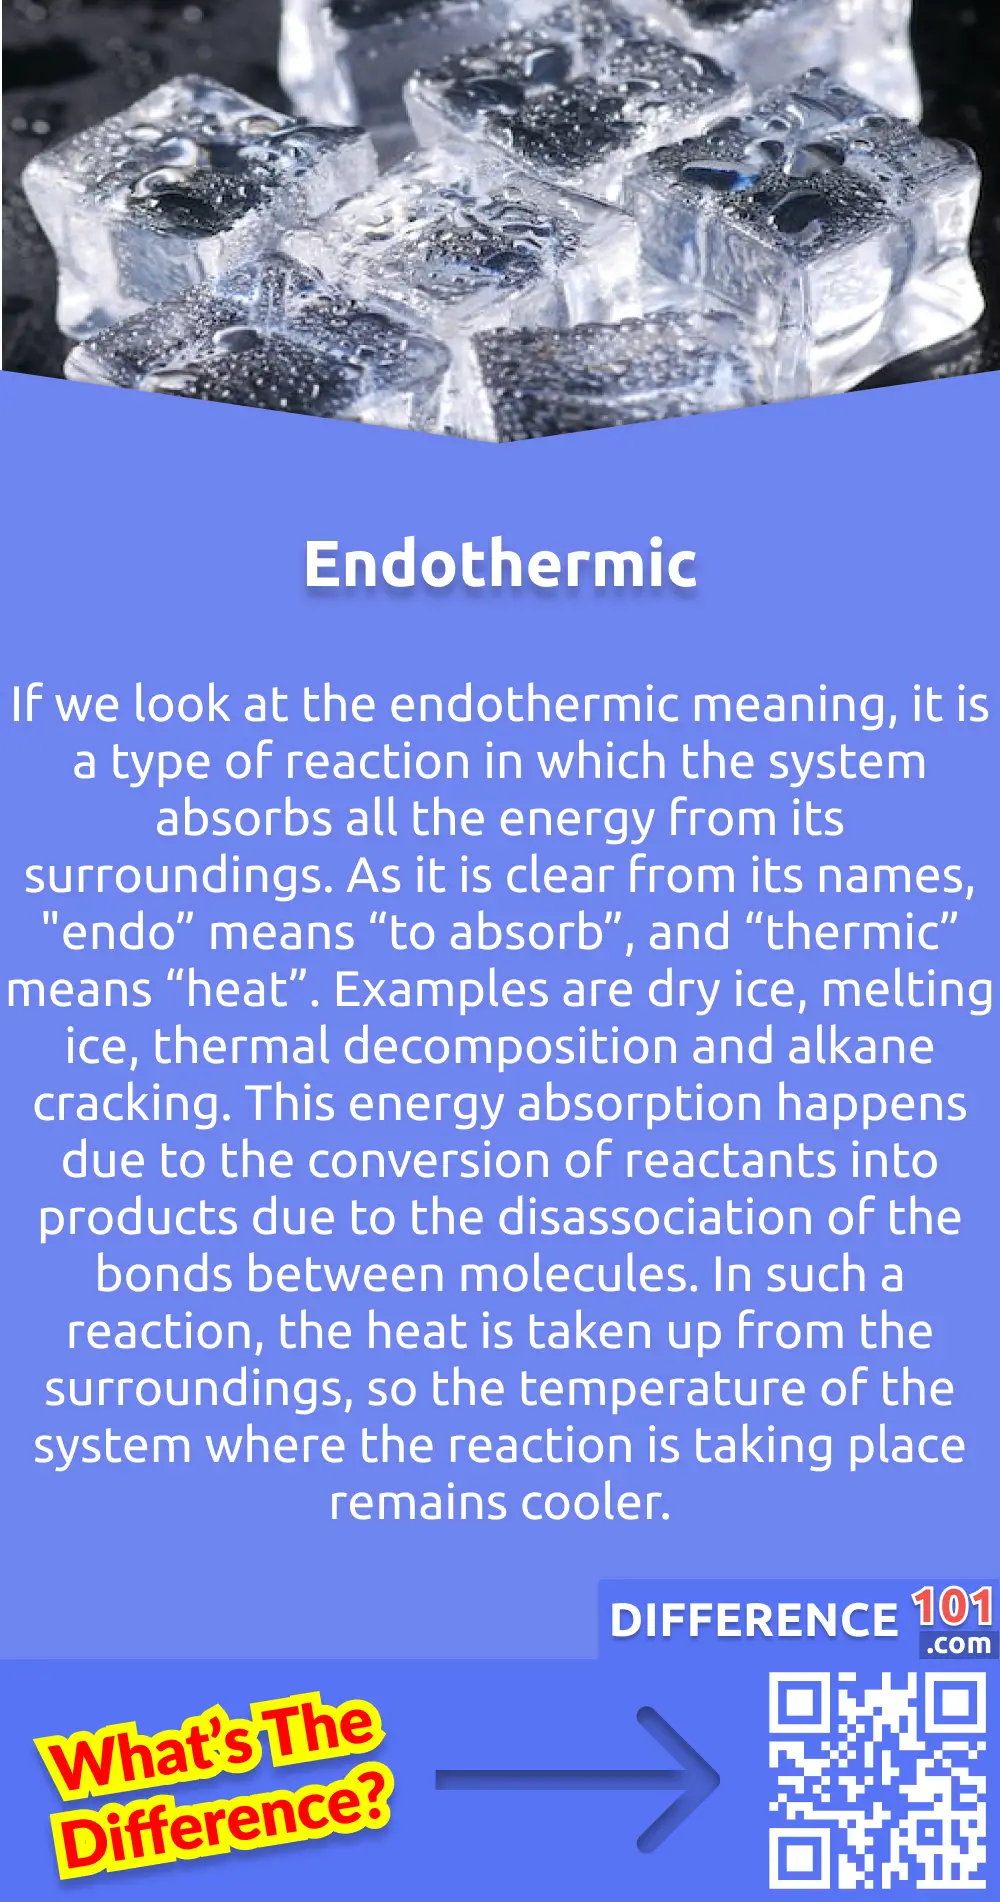 What Is an Endothermic Reaction? If we look at the endothermic meaning, it is a type of reaction in which the system absorbs all the energy from its surroundings. As it is clear from its names, "endo” means “to absorb”, and “thermic” means “heat”. Examples are dry ice, melting ice, thermal decomposition and alkane cracking. This energy absorption happens due to the conversion of reactants into products due to the disassociation of the bonds between molecules. In such a reaction, the heat is taken up from the surroundings, so the temperature of the system where the reaction is taking place remains cooler. Also, the enthalpy, a change in the heat energy during the conversion of reactant to the products, is higher at the end of the reaction.
